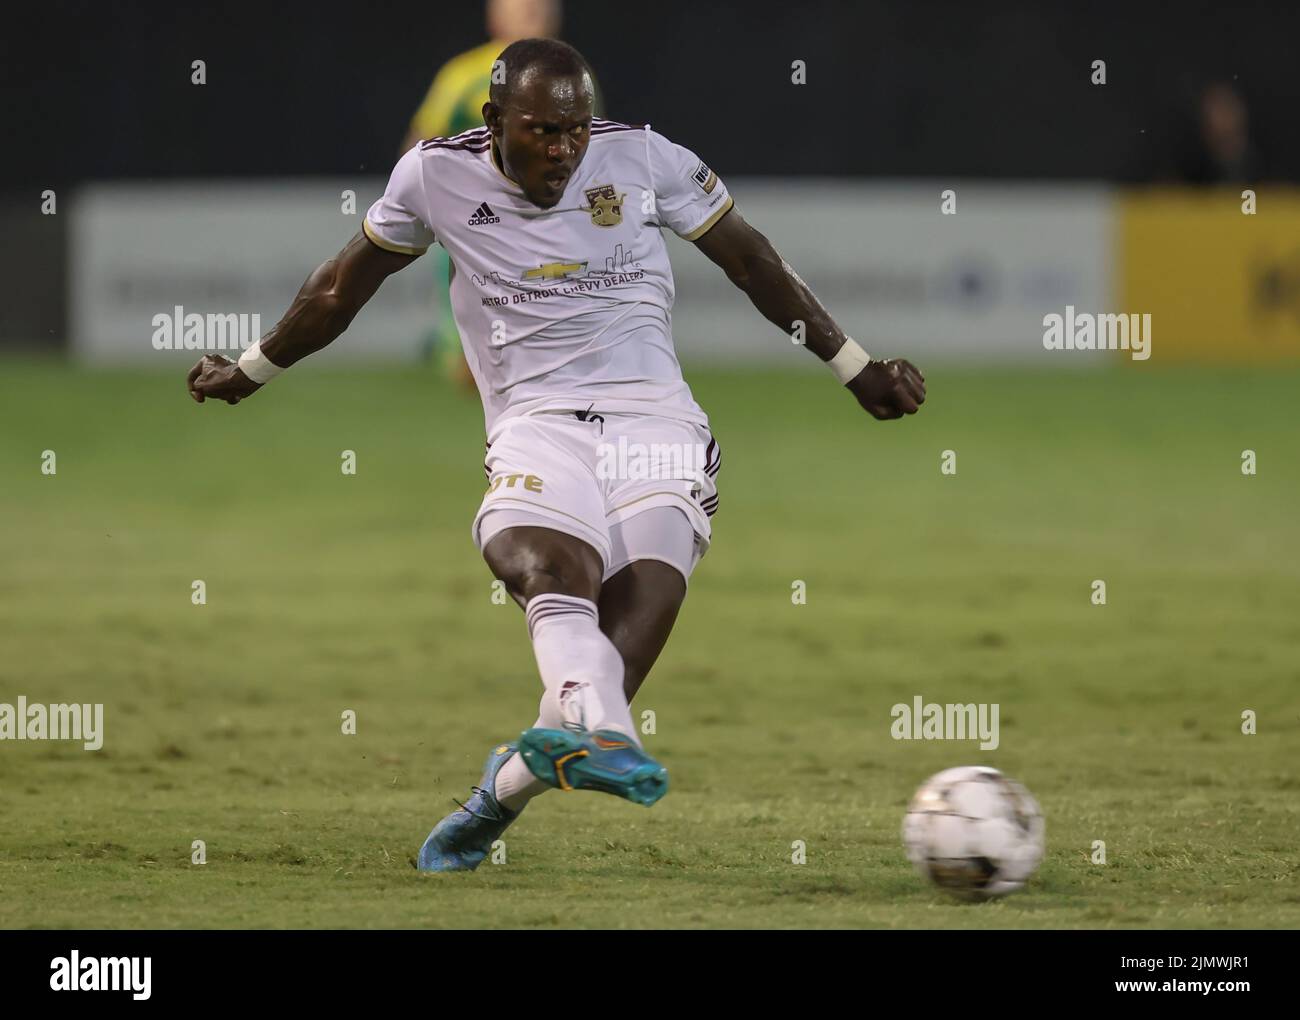 St. Petersburg, FL: Detroit City forward Francis Atuahene (9) dribbles the ball up the pitch during a USL soccer game against the Tampa Bay Rowdies, S Stock Photo